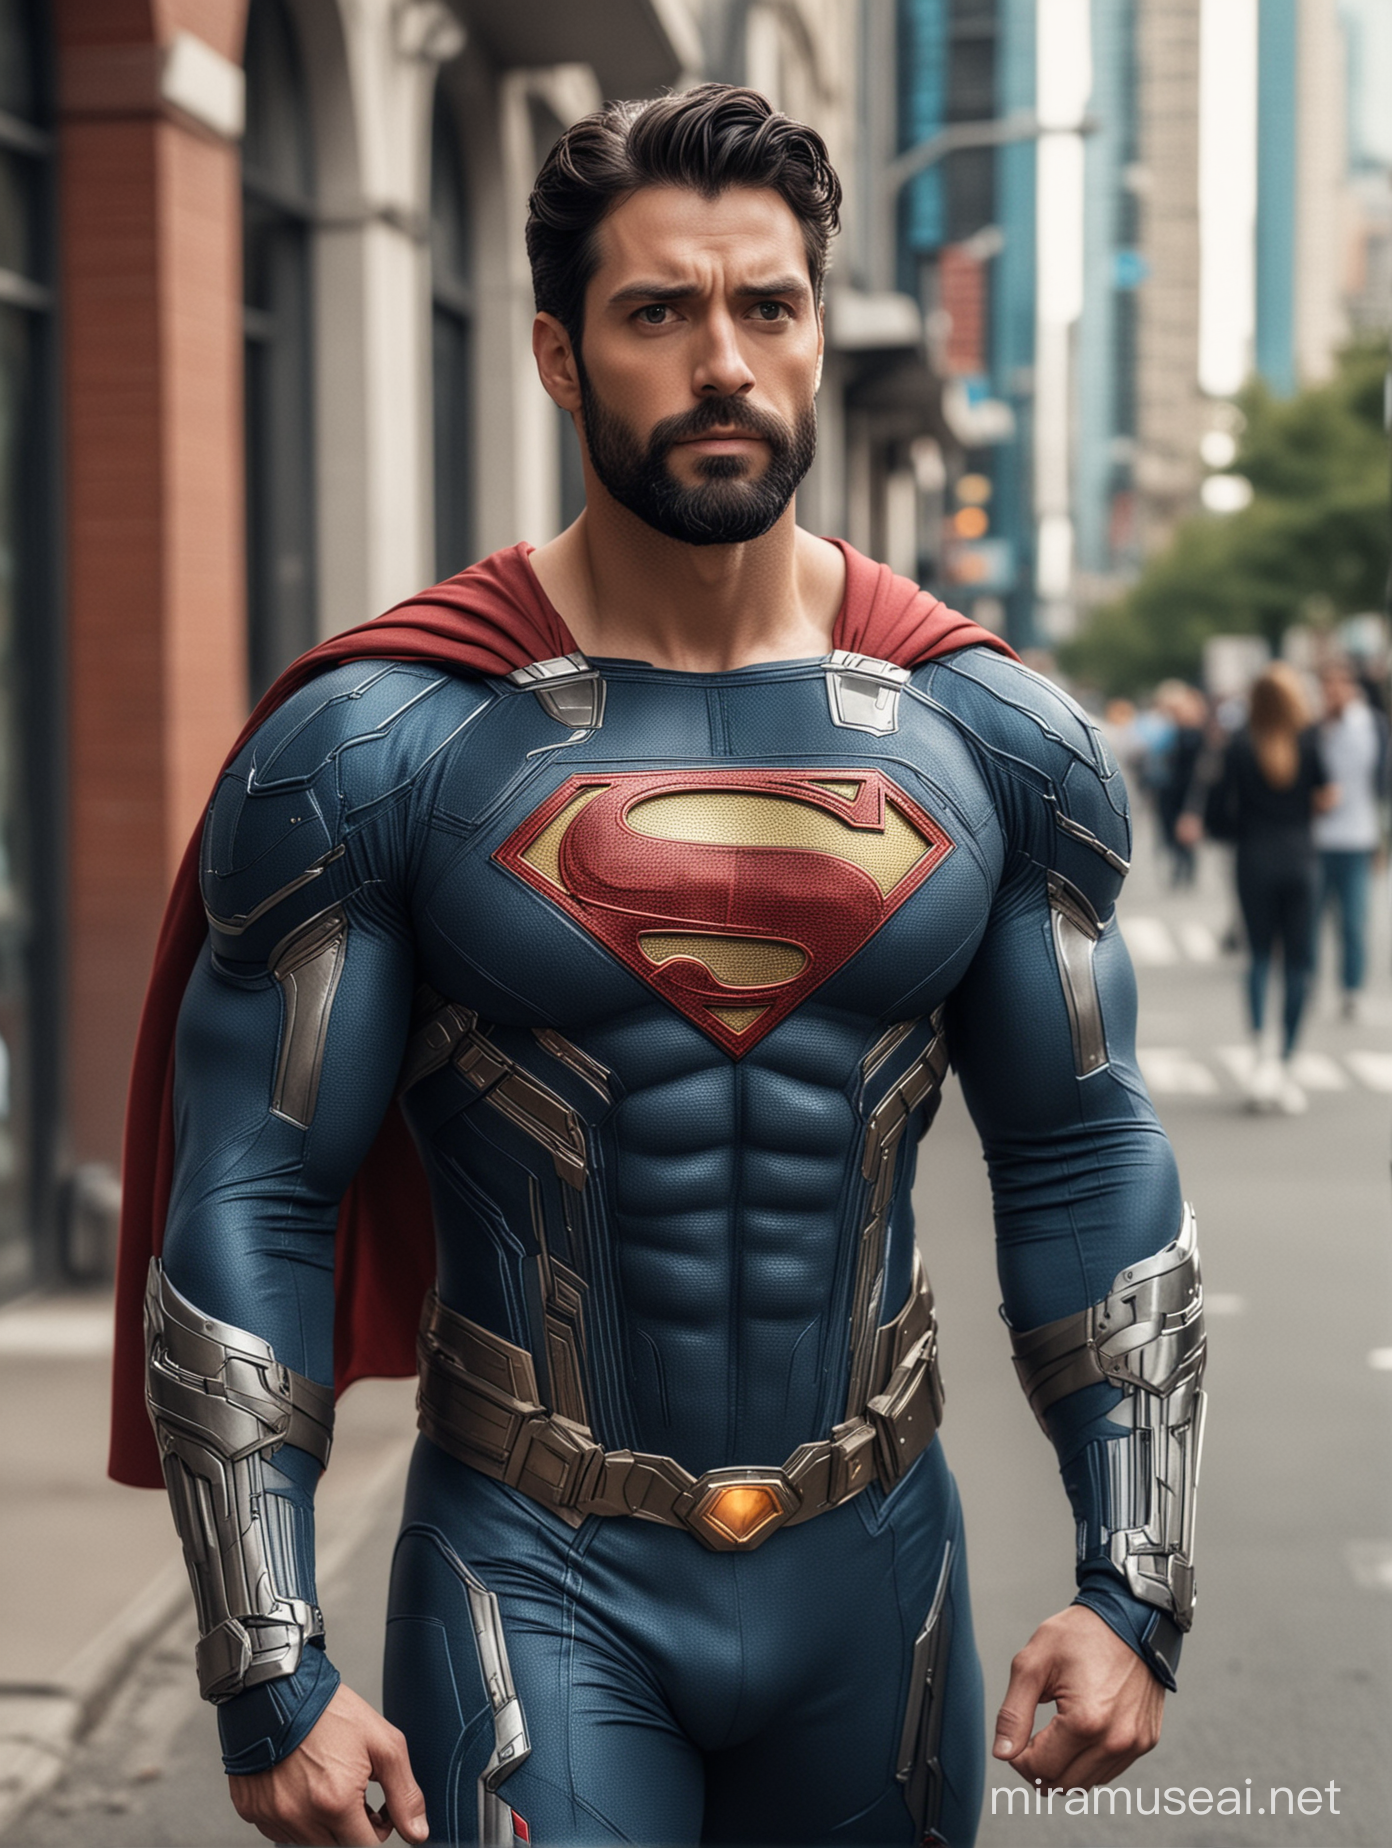 Tall and handsome muscular Superman with beautiful hairstyle and beard with attractive eyes and Big wide shoulder and chest in sci-fi High Tech armour suit walking on street 